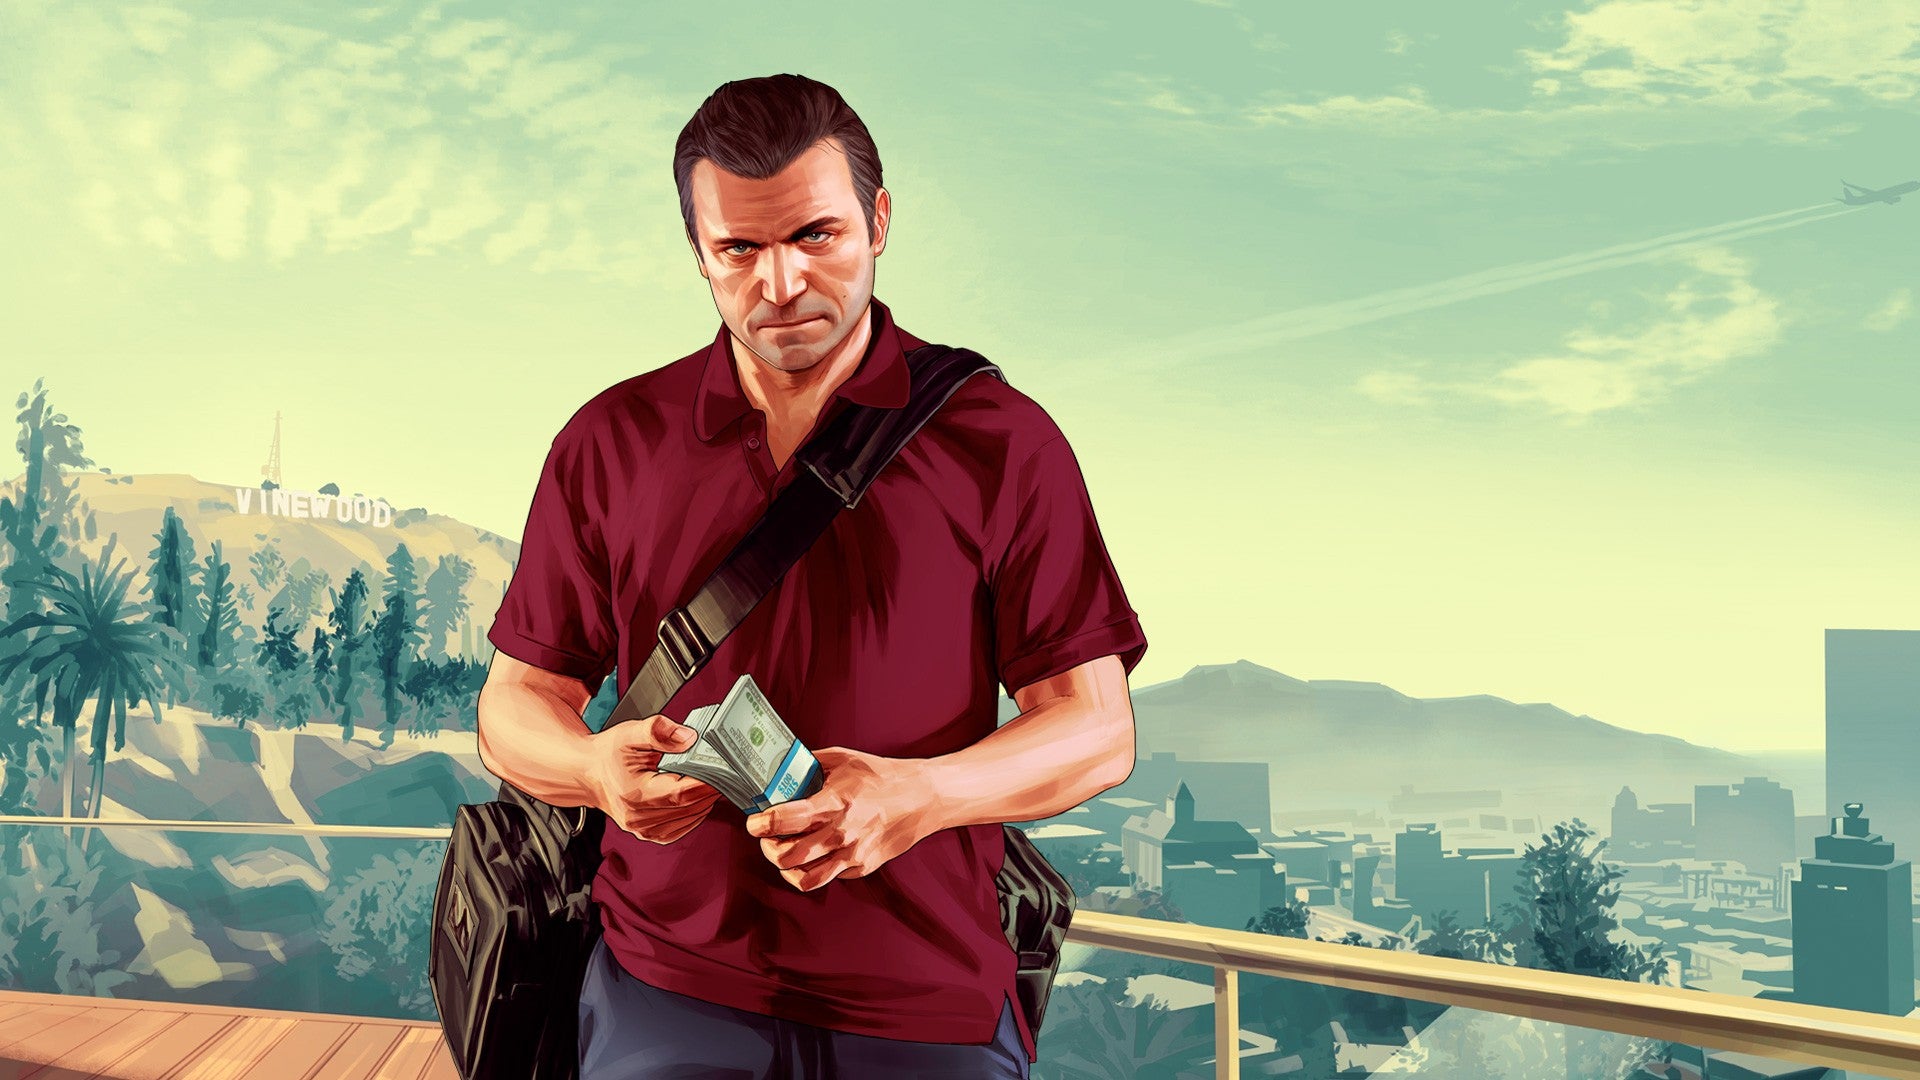 Image for Grand Theft Auto units sales exceed 370 million, GTA 5 sales exceed 160 million units